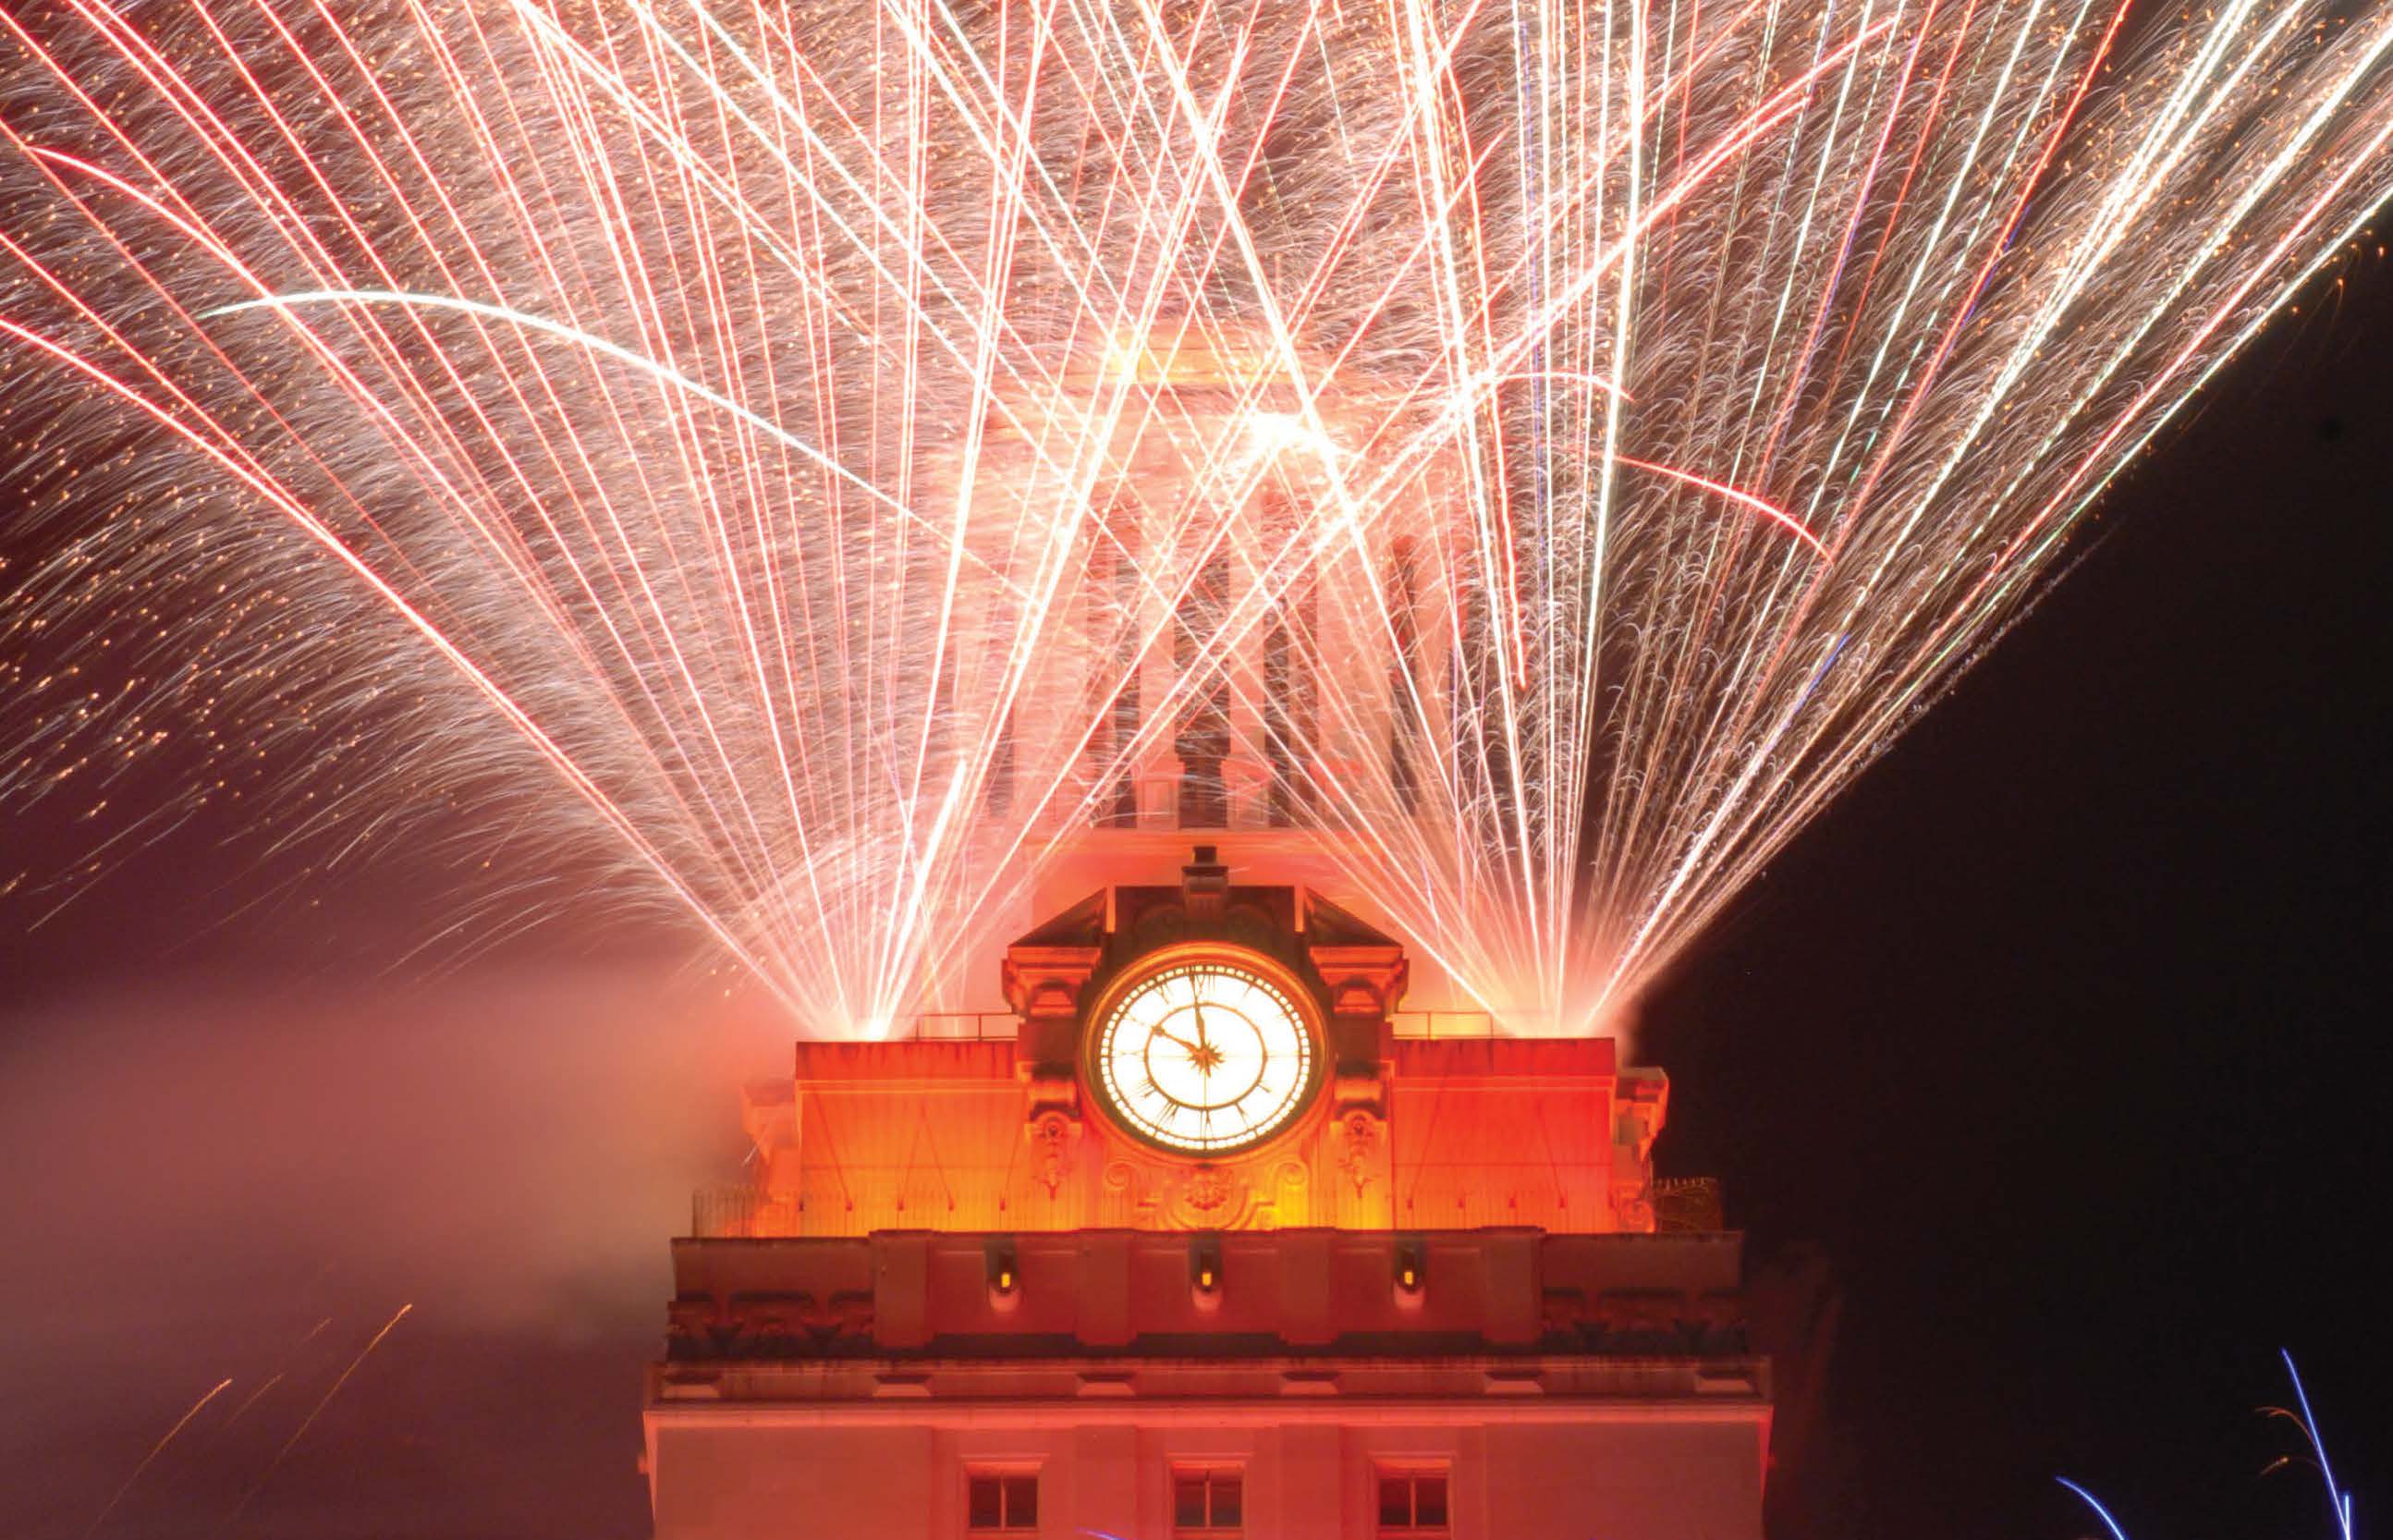 multiple fireworks light up the night sky behind the UT tower.